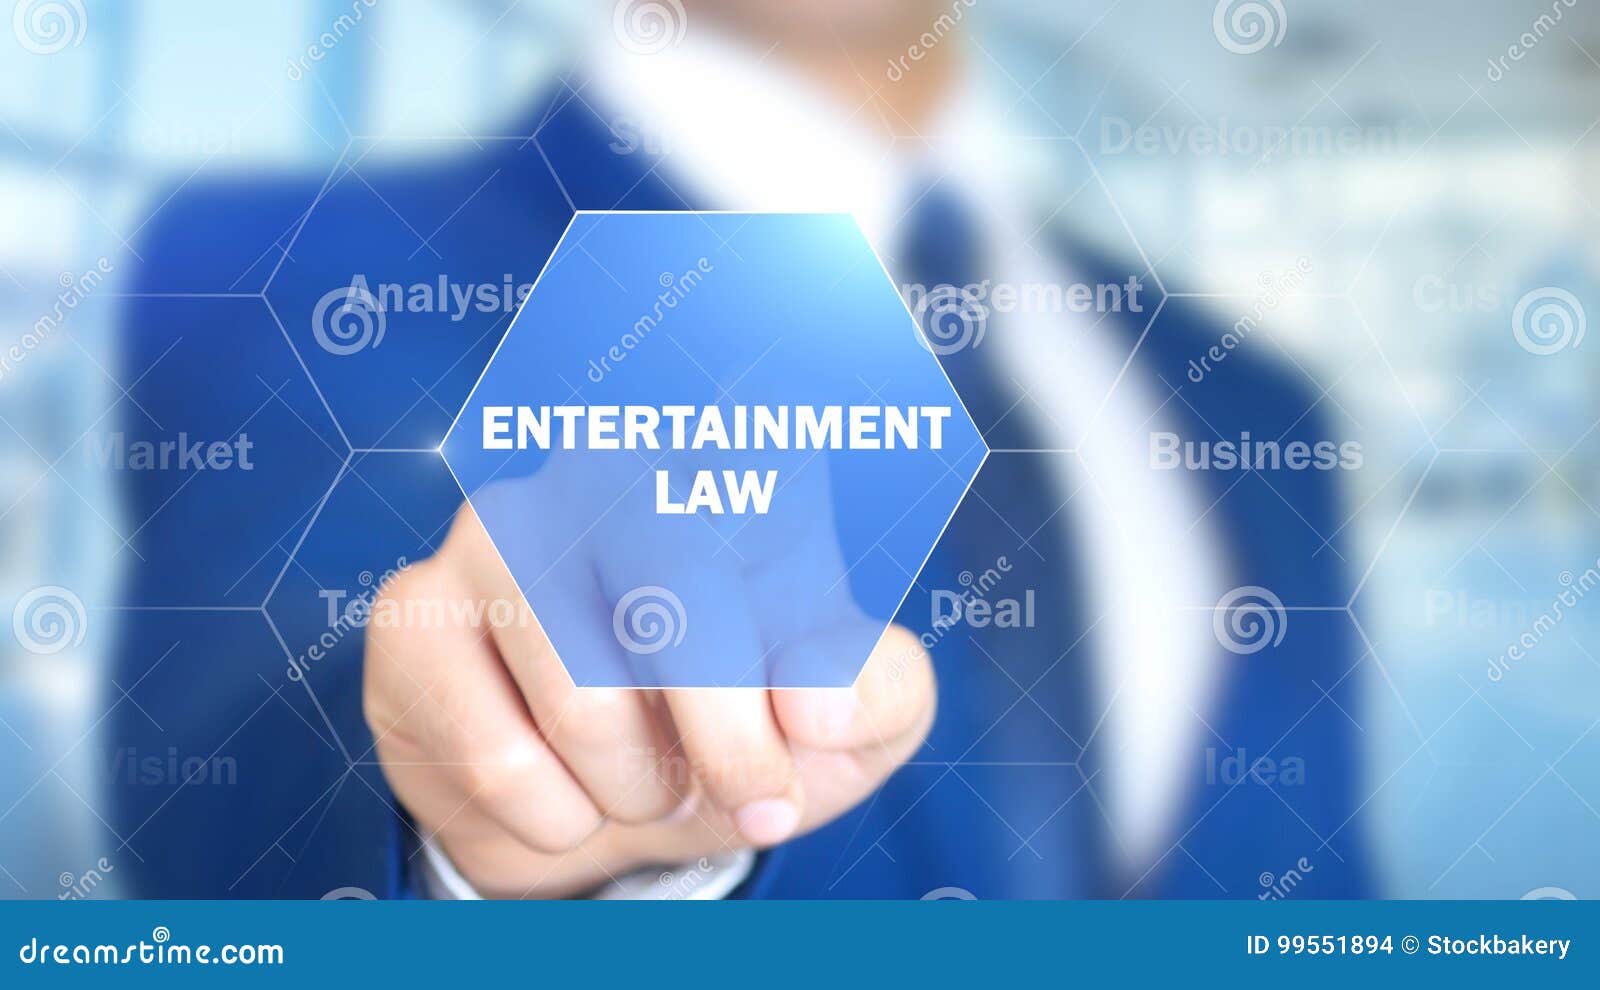 entertainment law, man working on holographic interface, visual screen